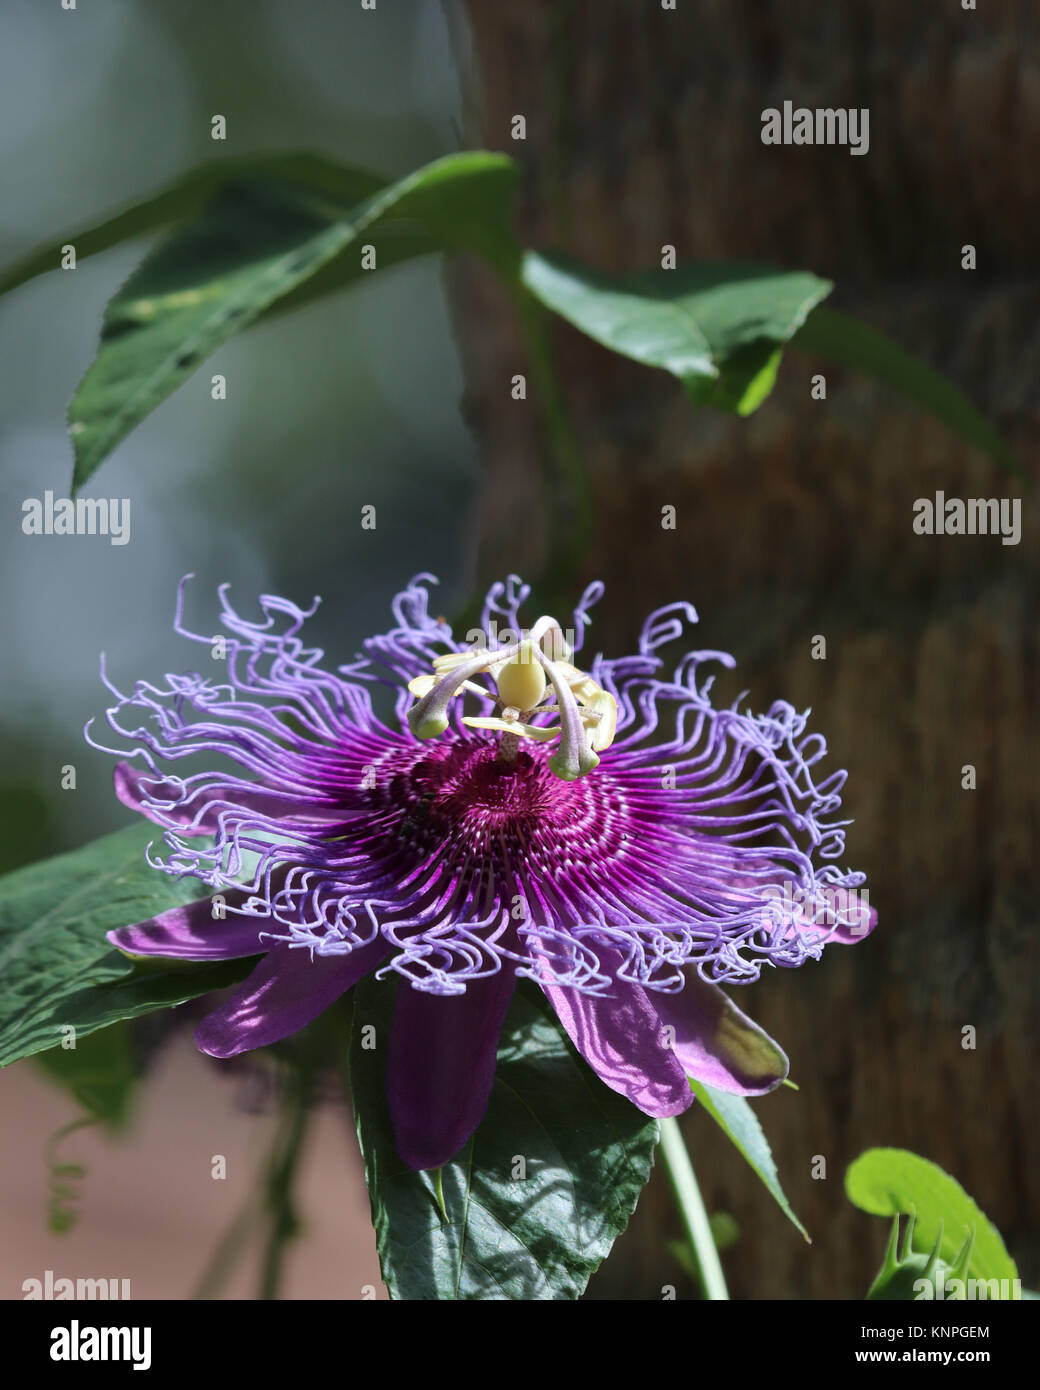 The unique looking purple passionflower plant is a fast growing perennial wildflower with long trailing vines. Stock Photo